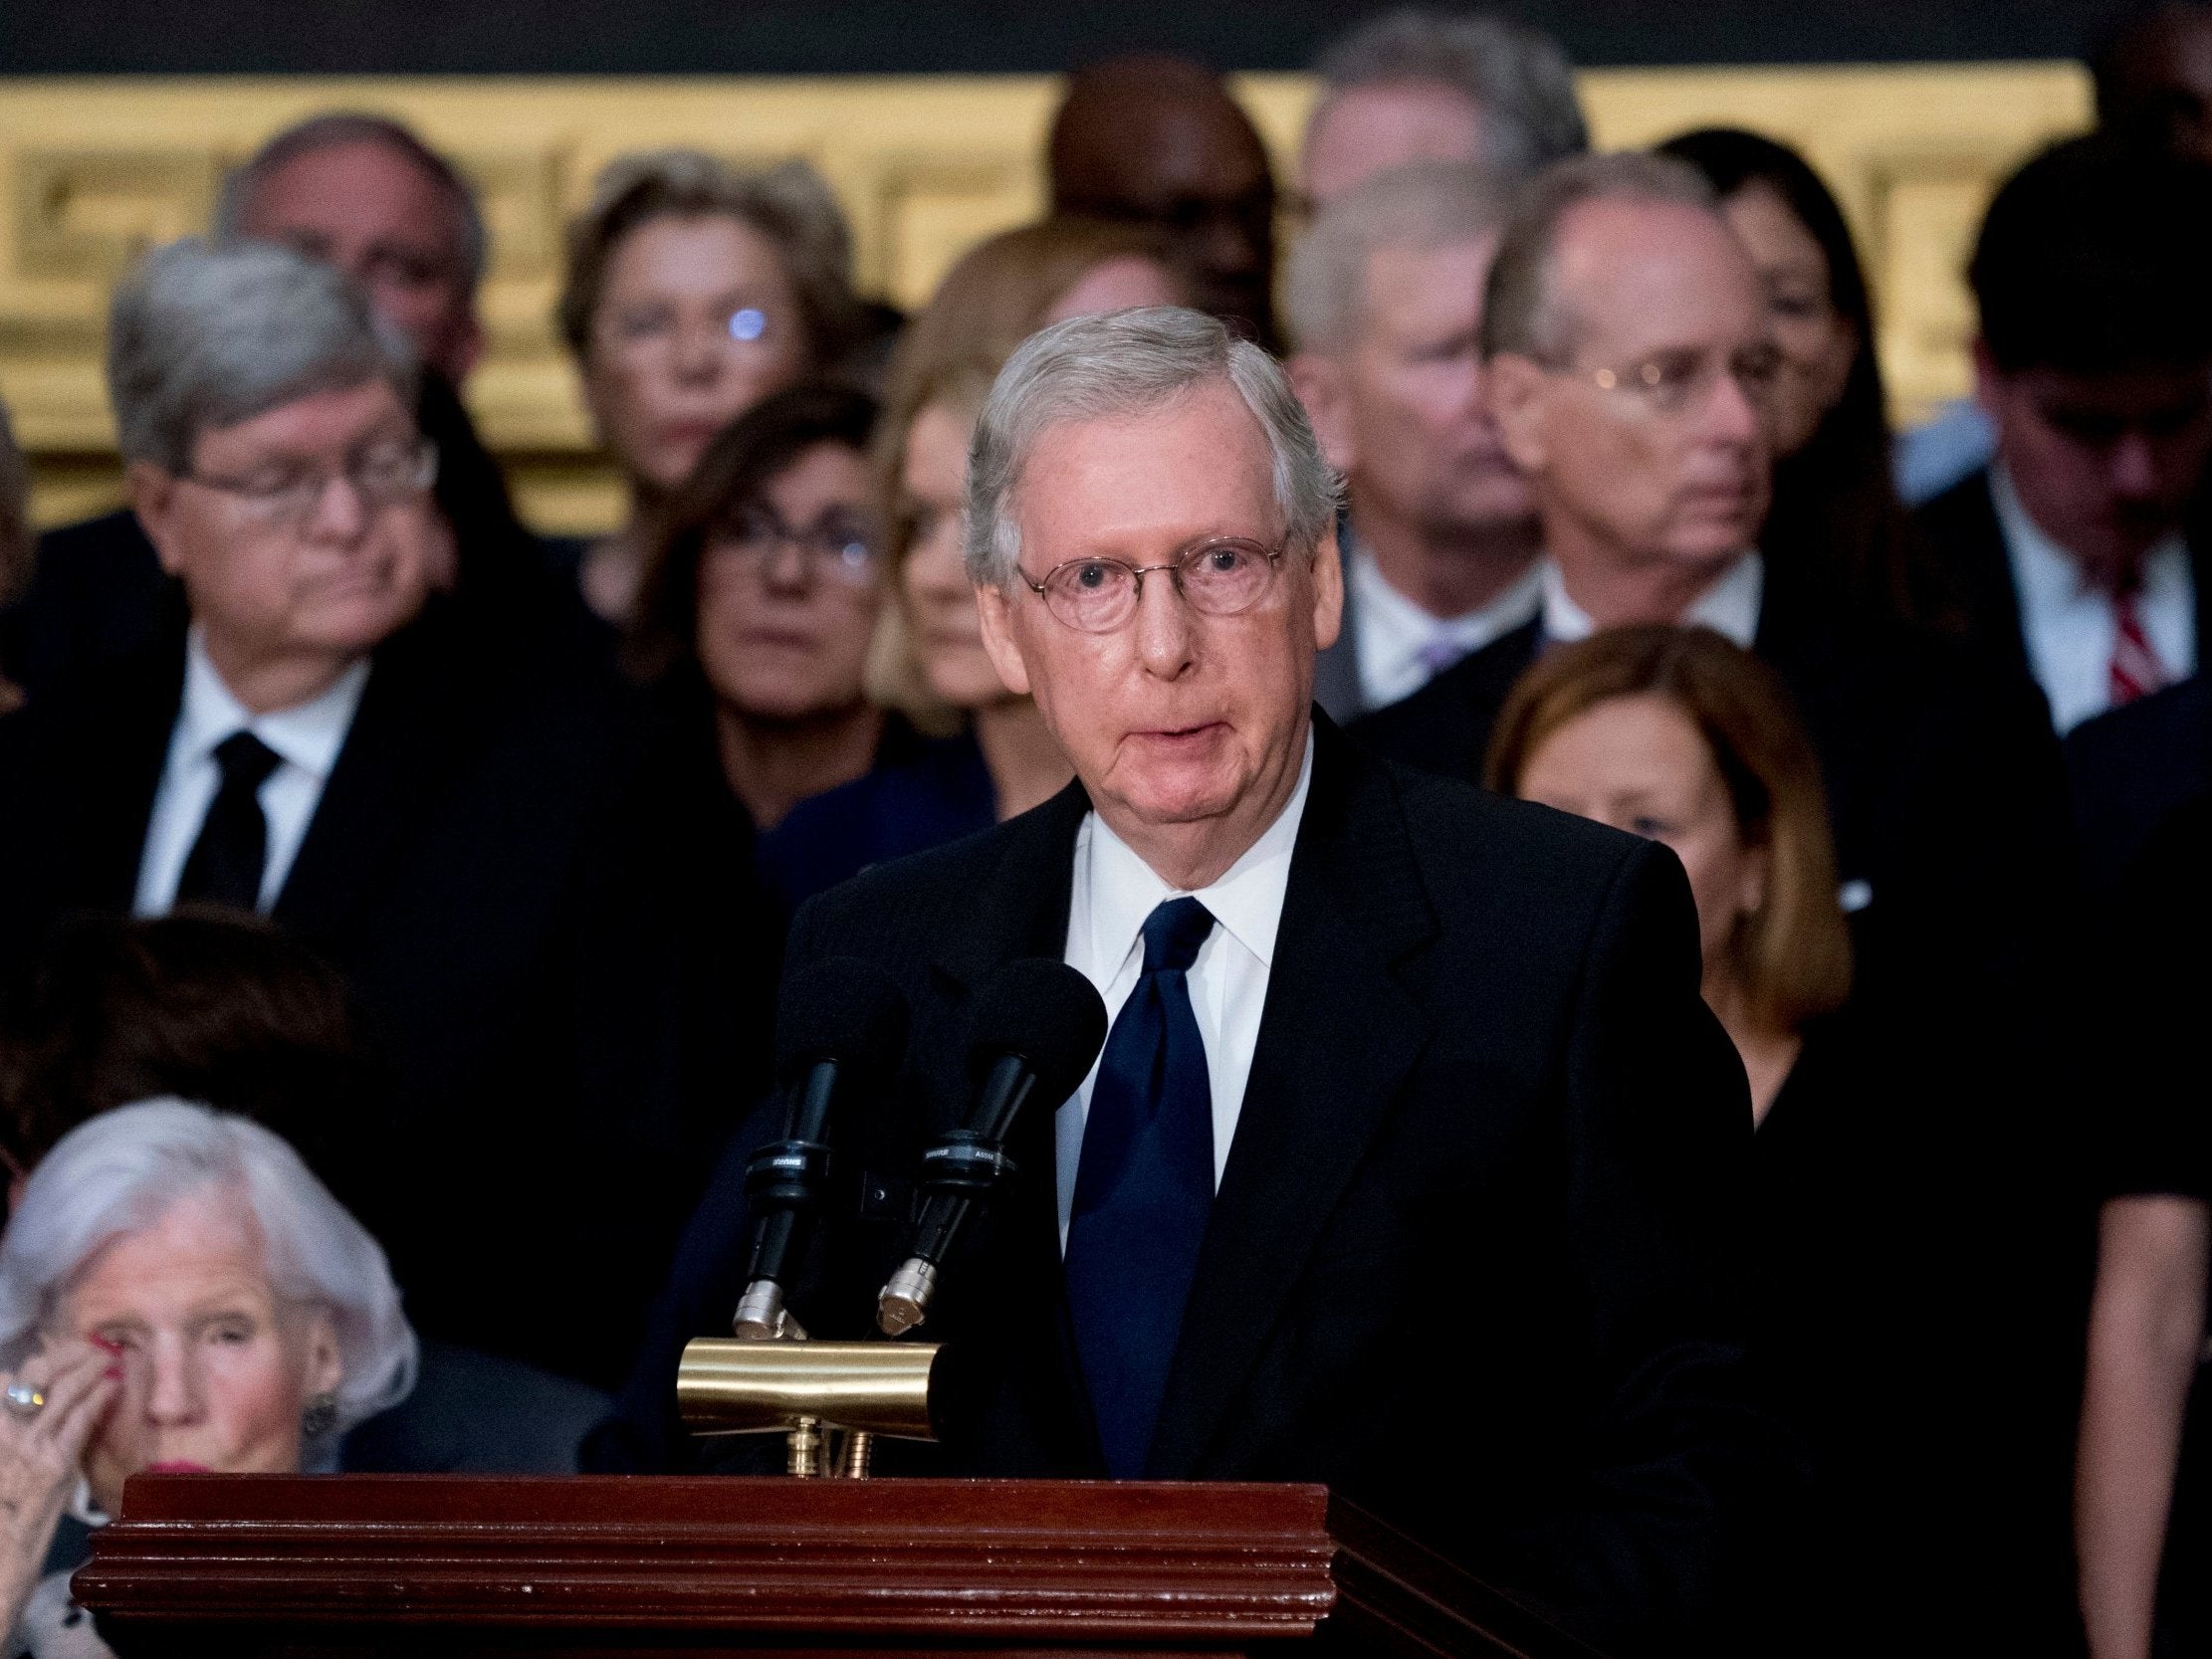 Mr McConnell and the Republicans are defending fewer seats the Democrats in the Senate